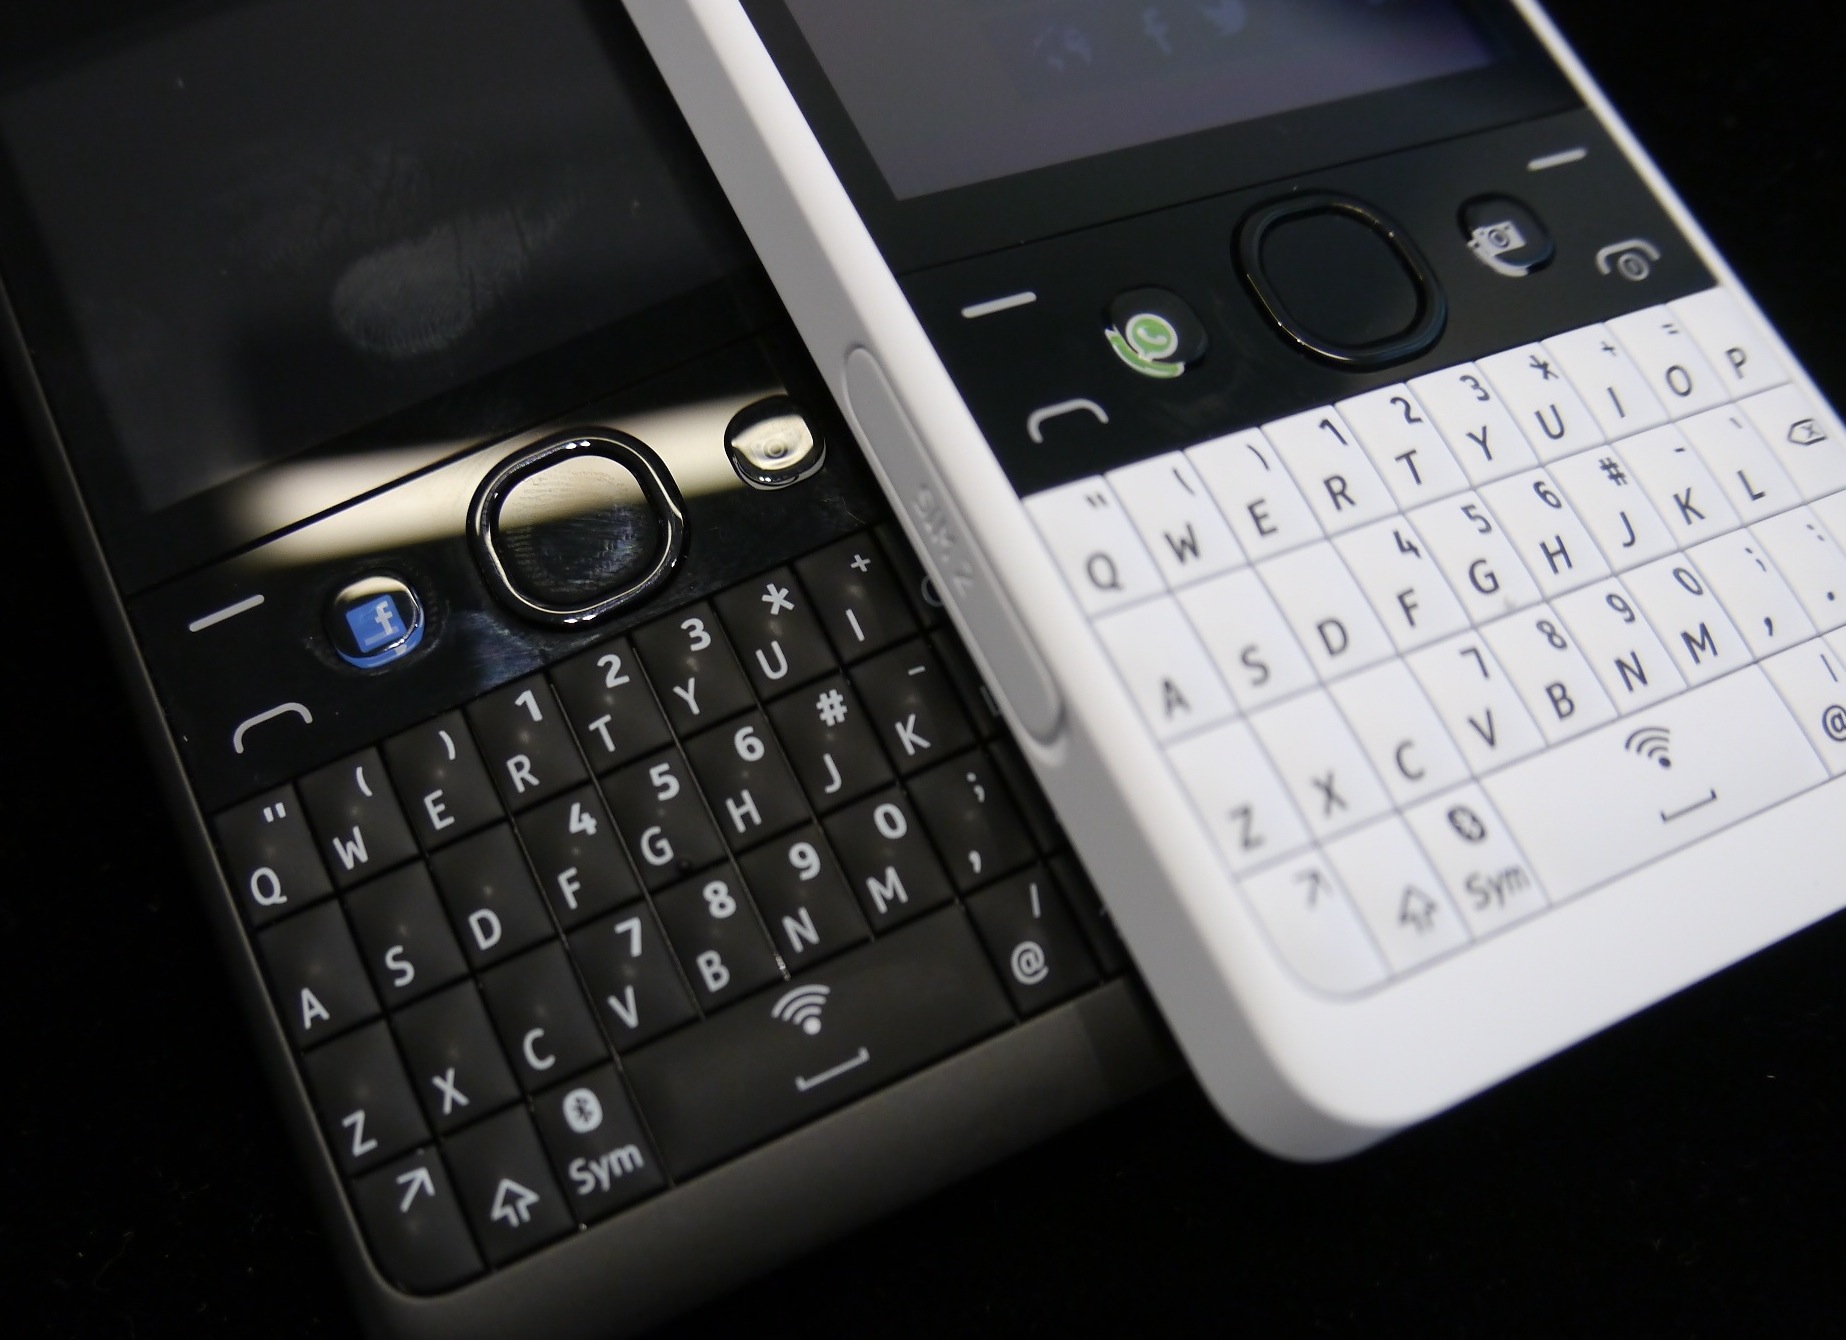 Nokia Puts WhatsApp Hard Key On $72 Asha 210 For Asia, Africa; Qwerty S40  Handset Gets Facebook Button In Europe, Latam